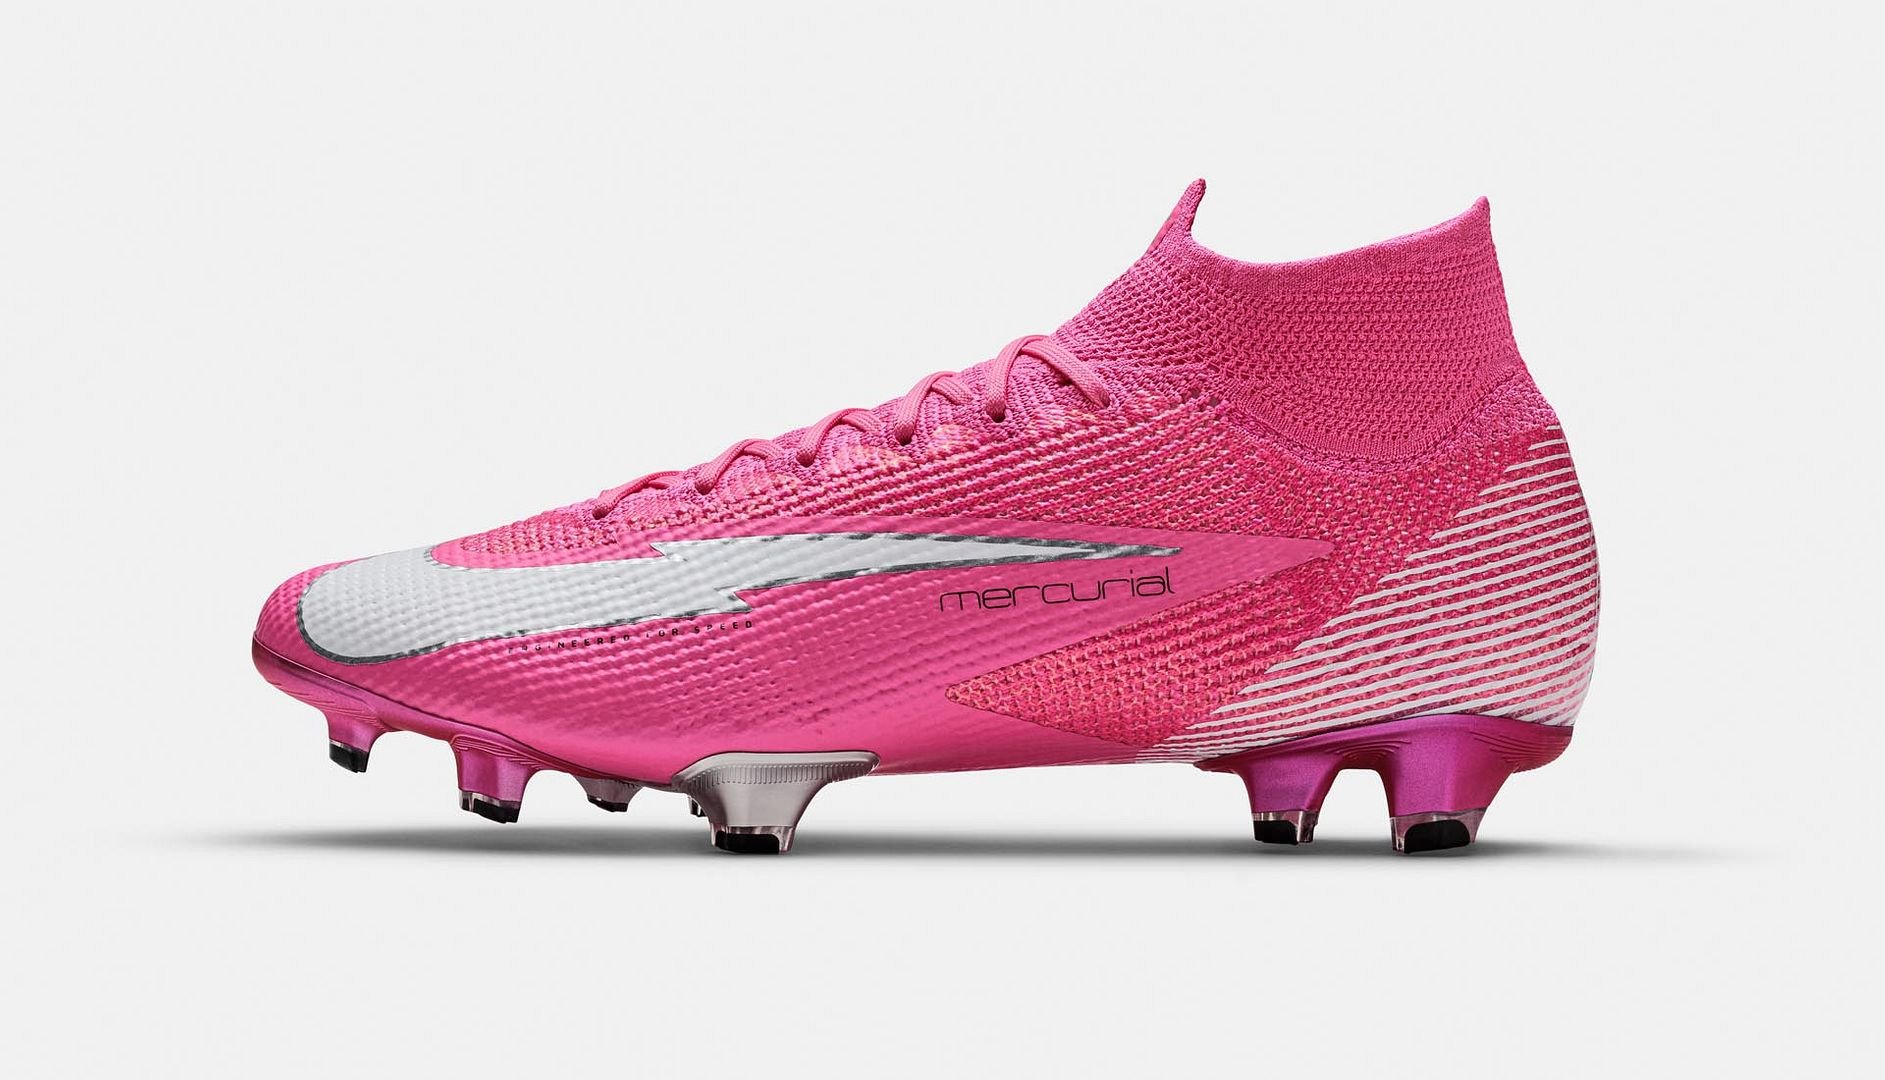 The beautiful look of the Nike Mercurial Mbappé Rosa